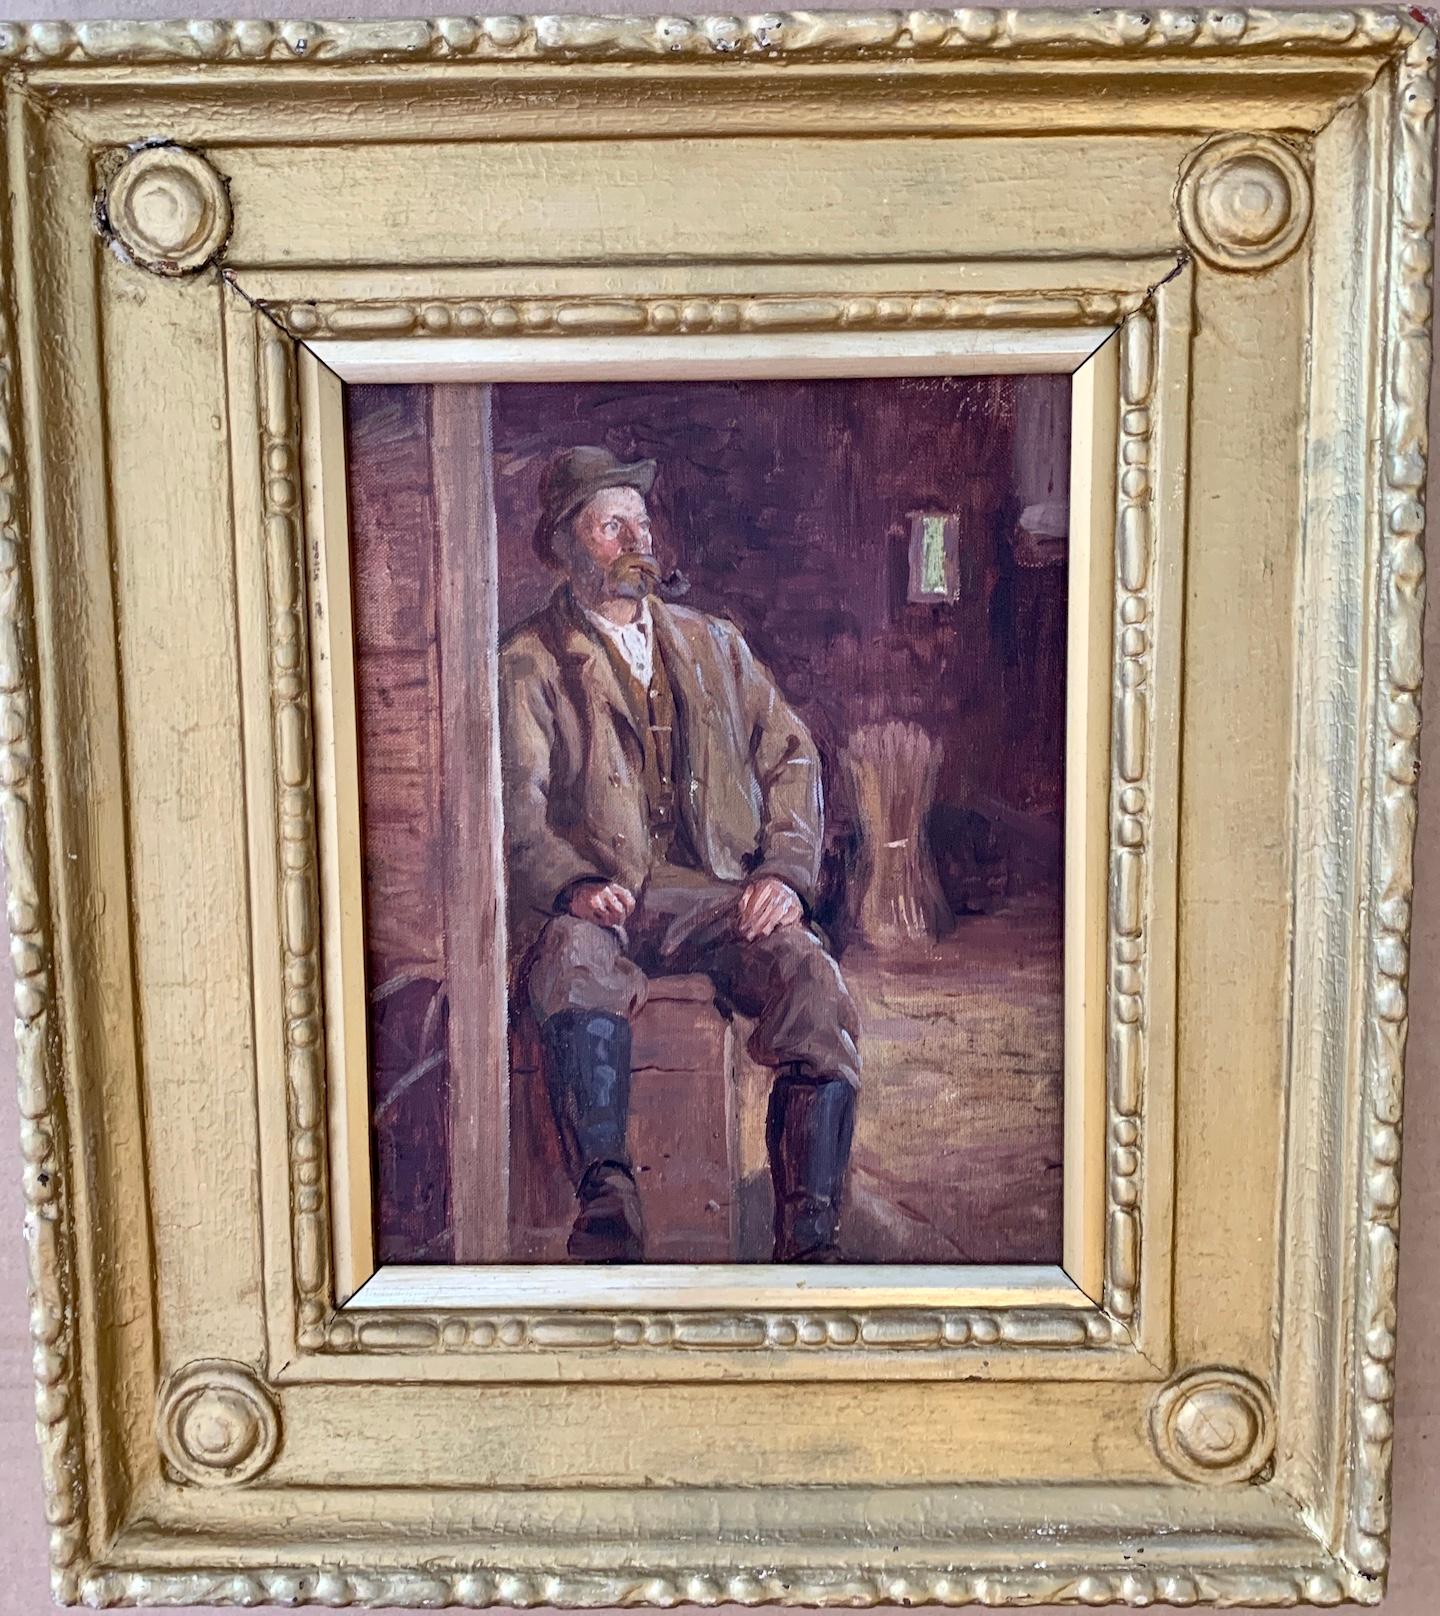 19th century Irish portrait of a man, smoking a Pipe, seated in a barn interior.